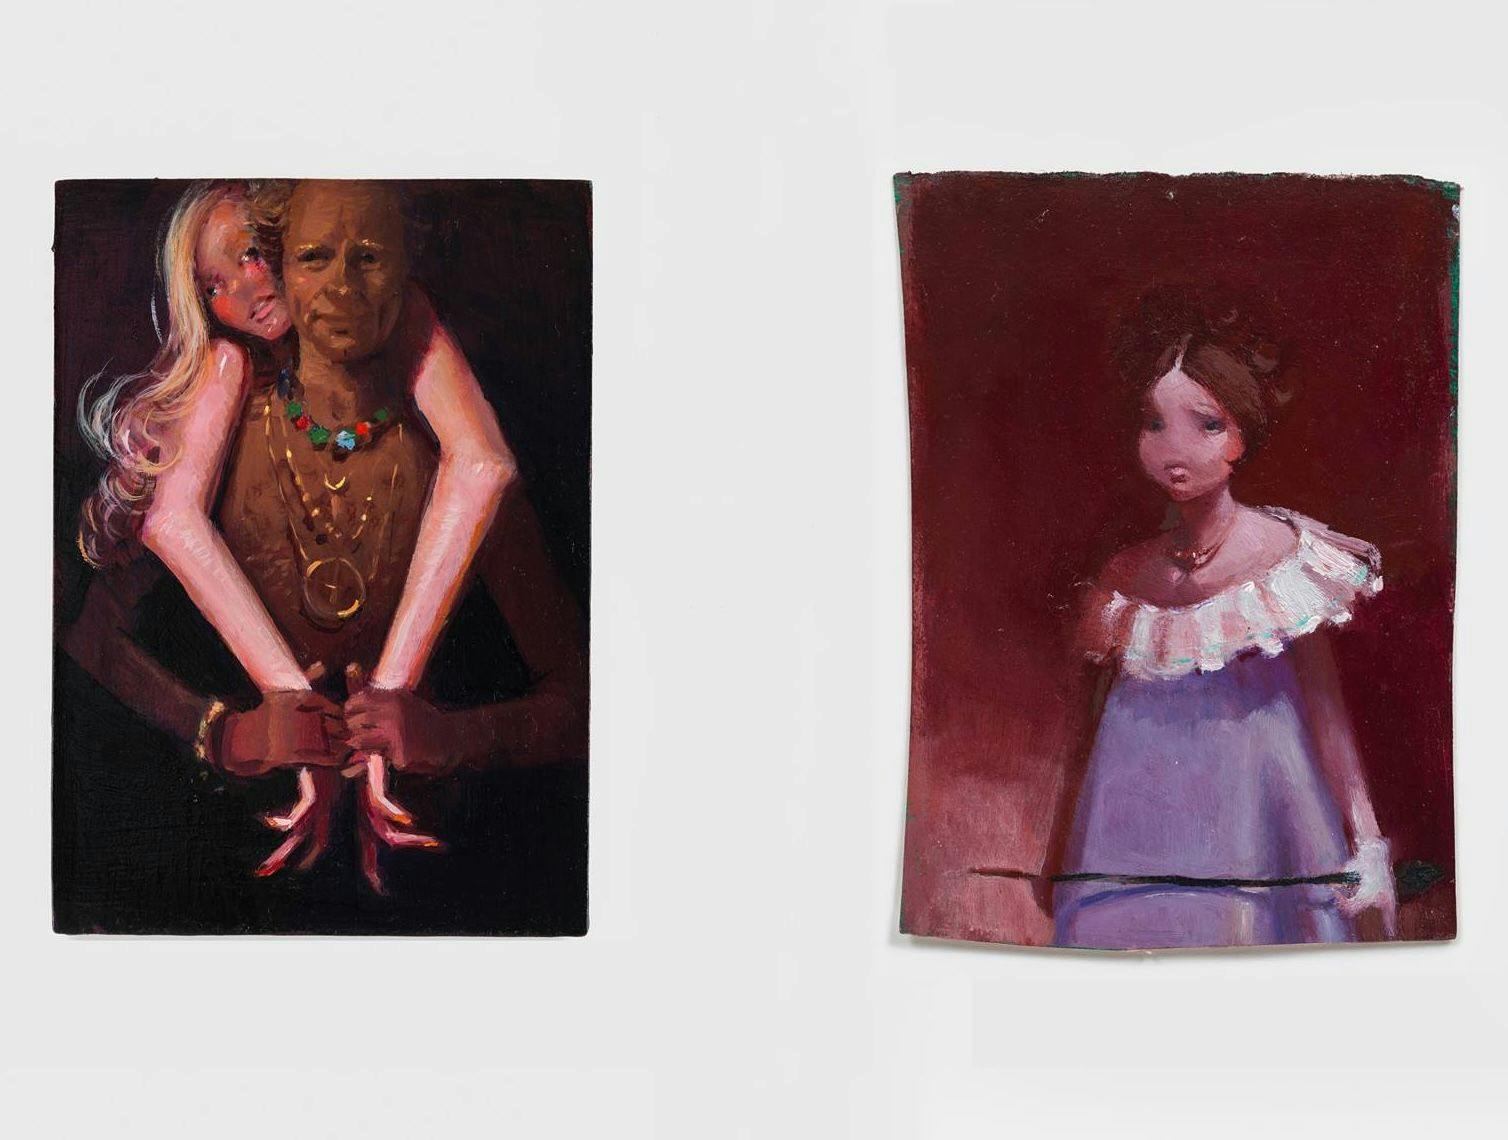 Two artworks by Lisa Yuskavage, titled Golden Couple, dated 2017 on the left, Lisa Yuskavage, titled Girl with Whip, dated 1997 on the right